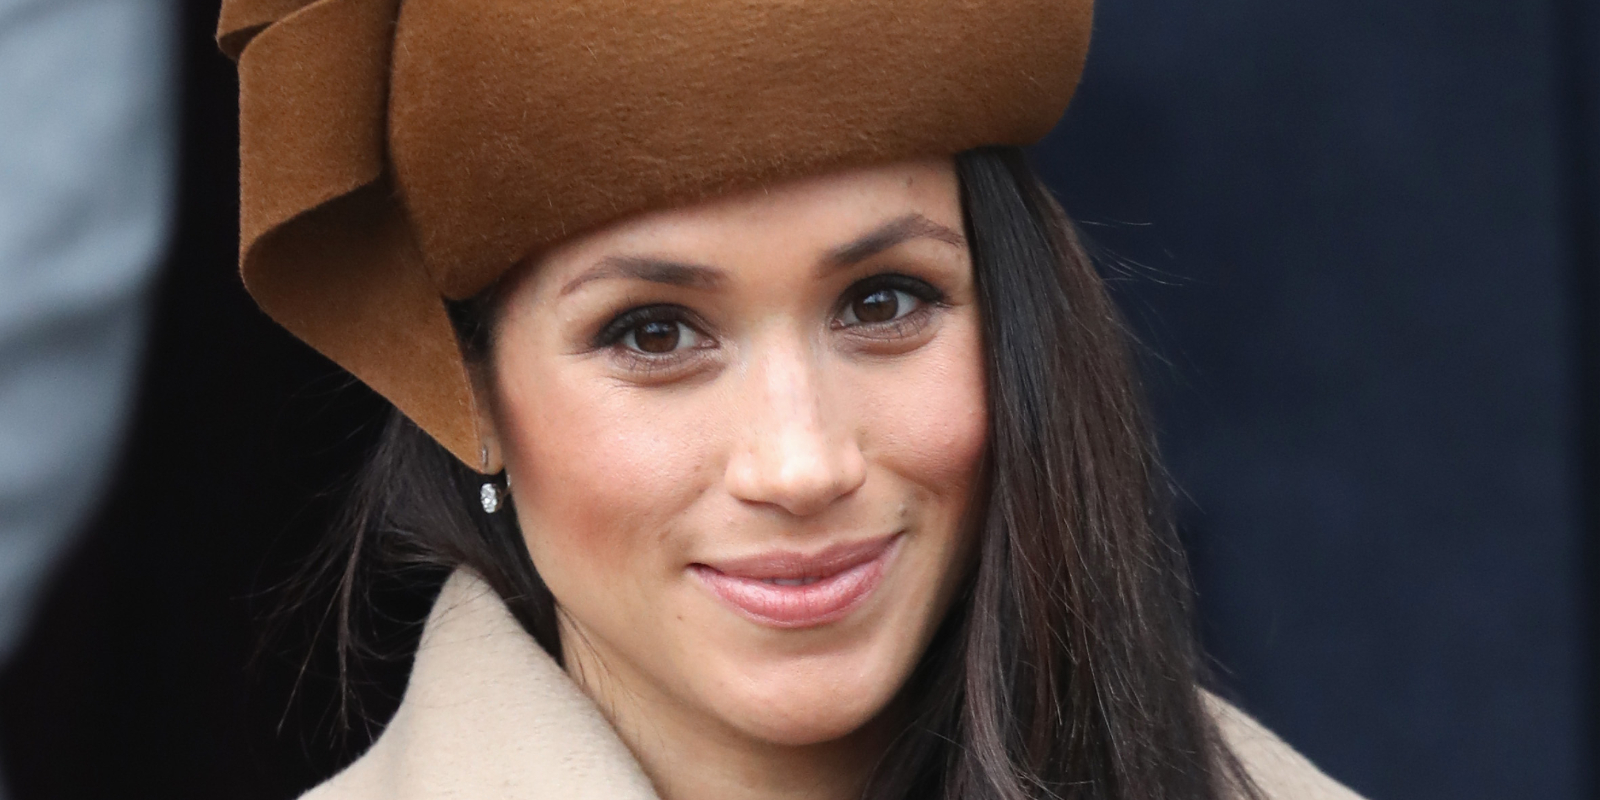 Body Language Expert Claims Meghan Markle’s Eyes ‘Dead’ After Going Public with Prince Harry